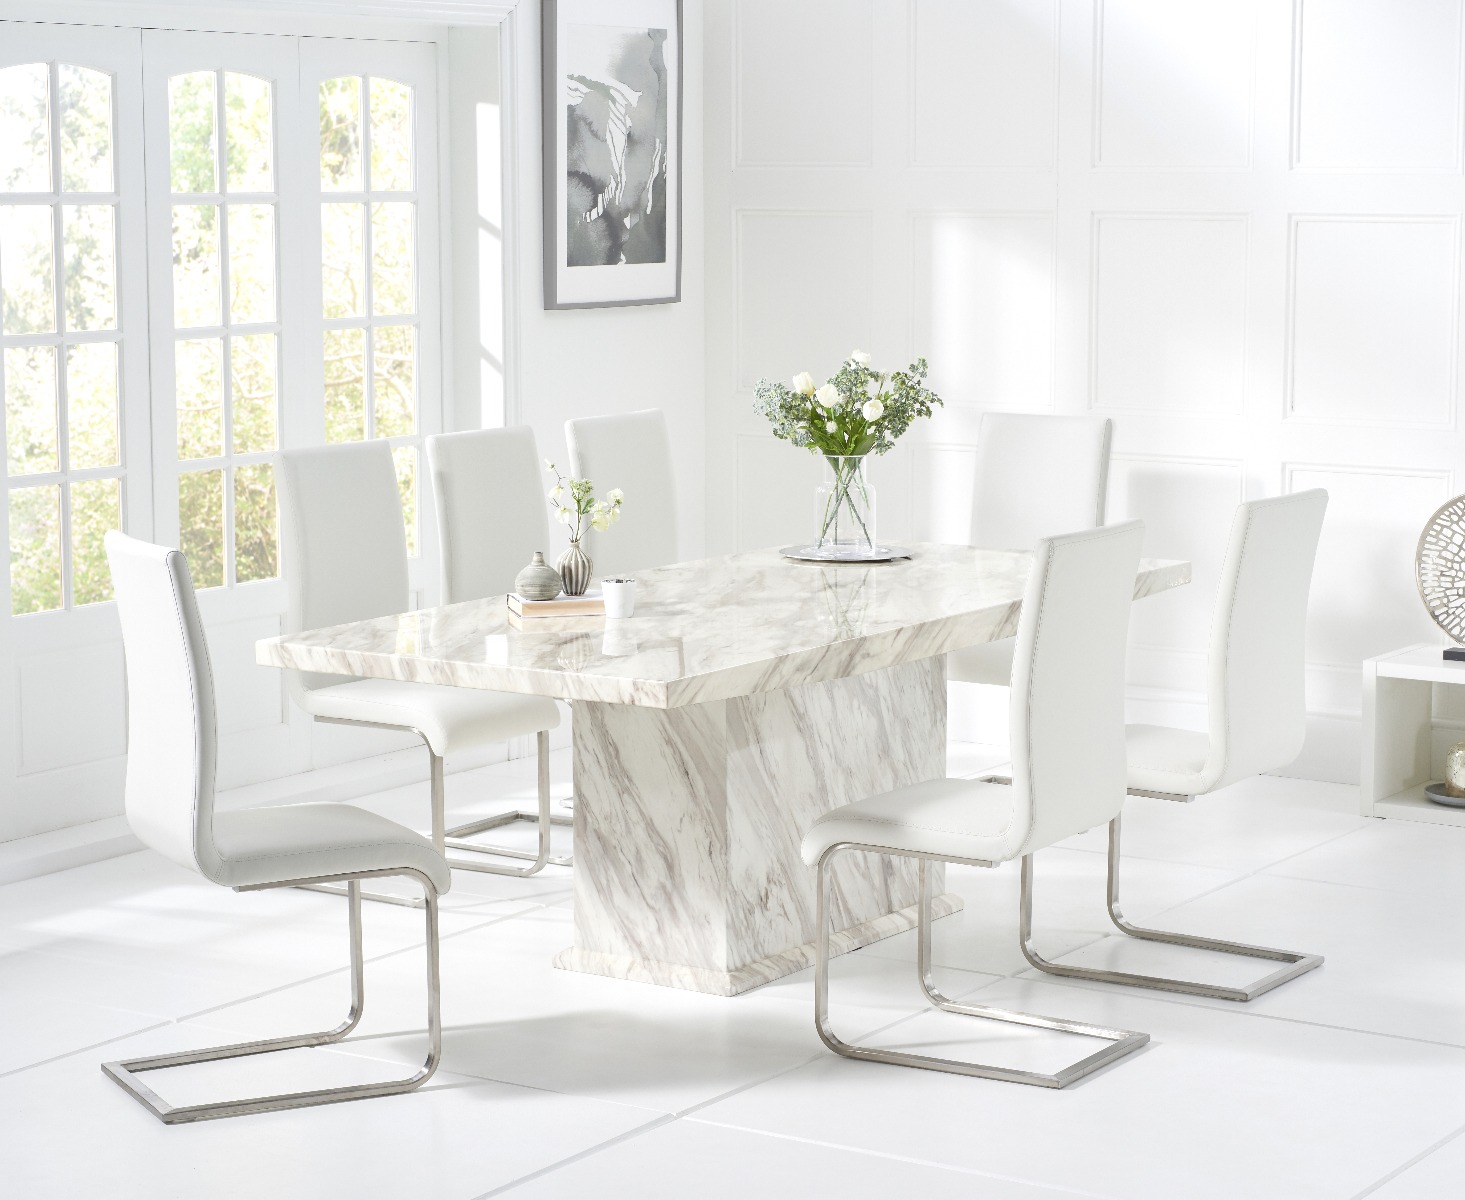 Calacatta 220cm Marbleeffect Dining Table With 6 Grey Malaga Chairs